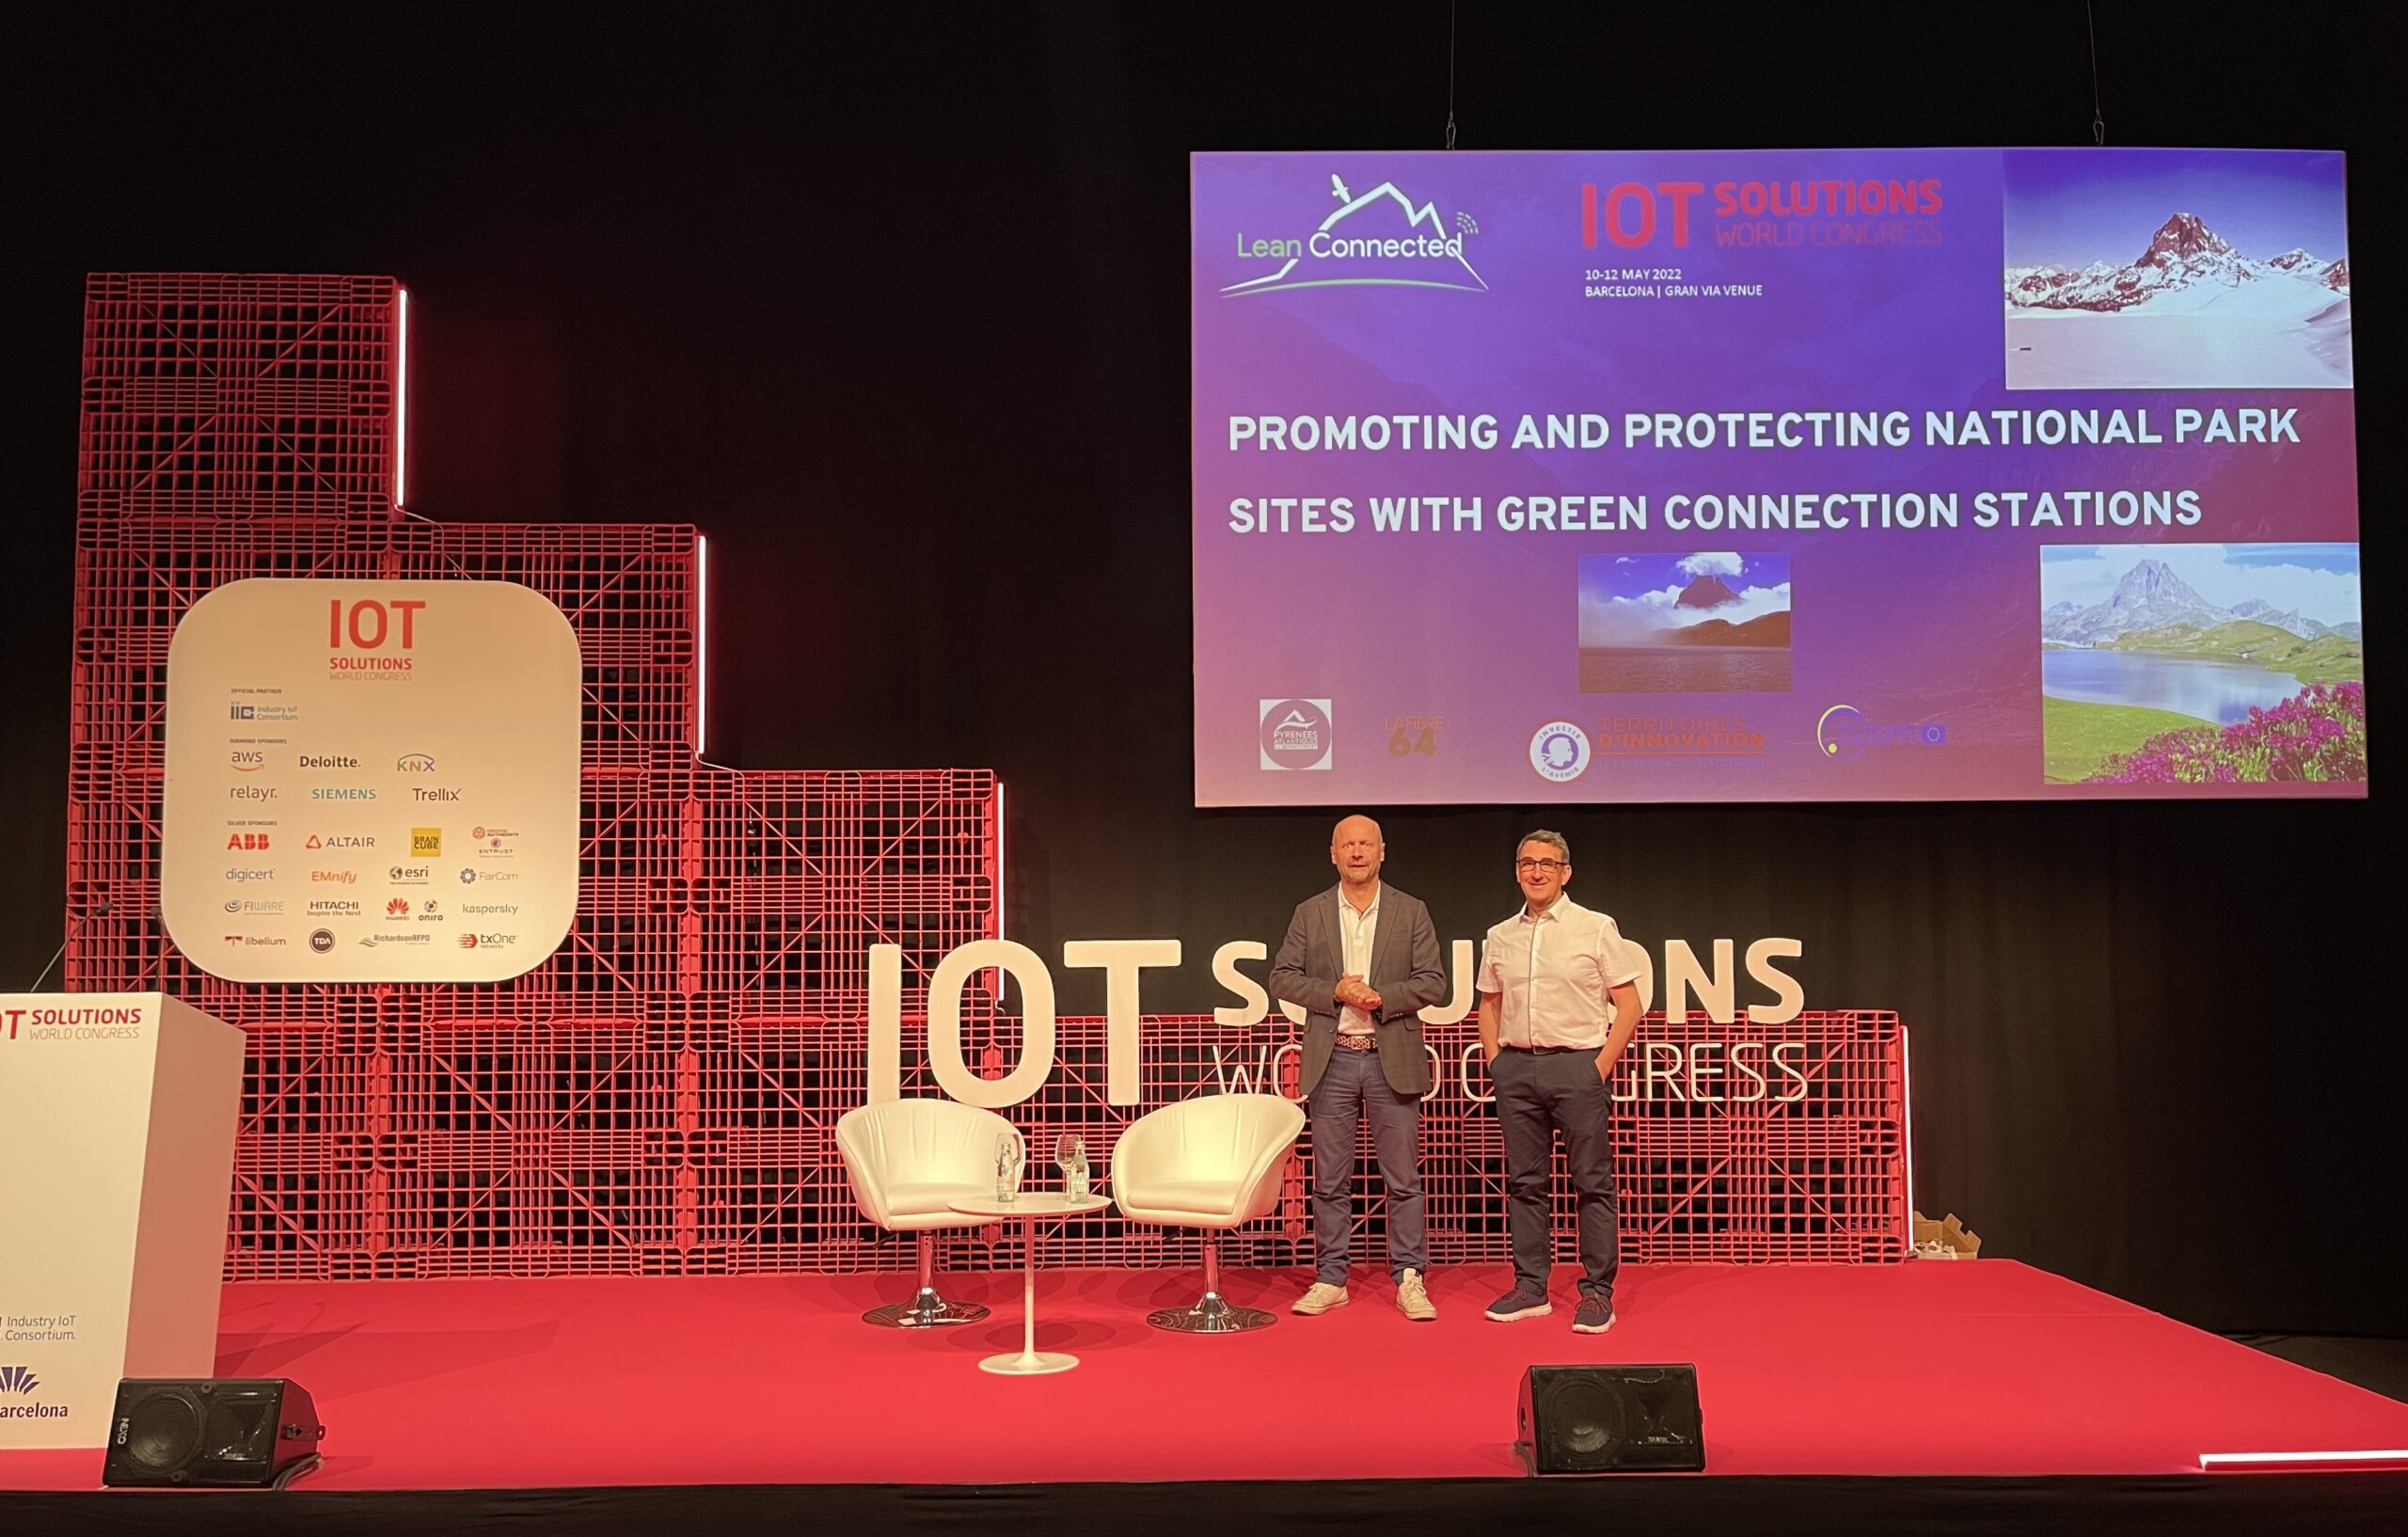 LeanConnected at the IoT World Congress